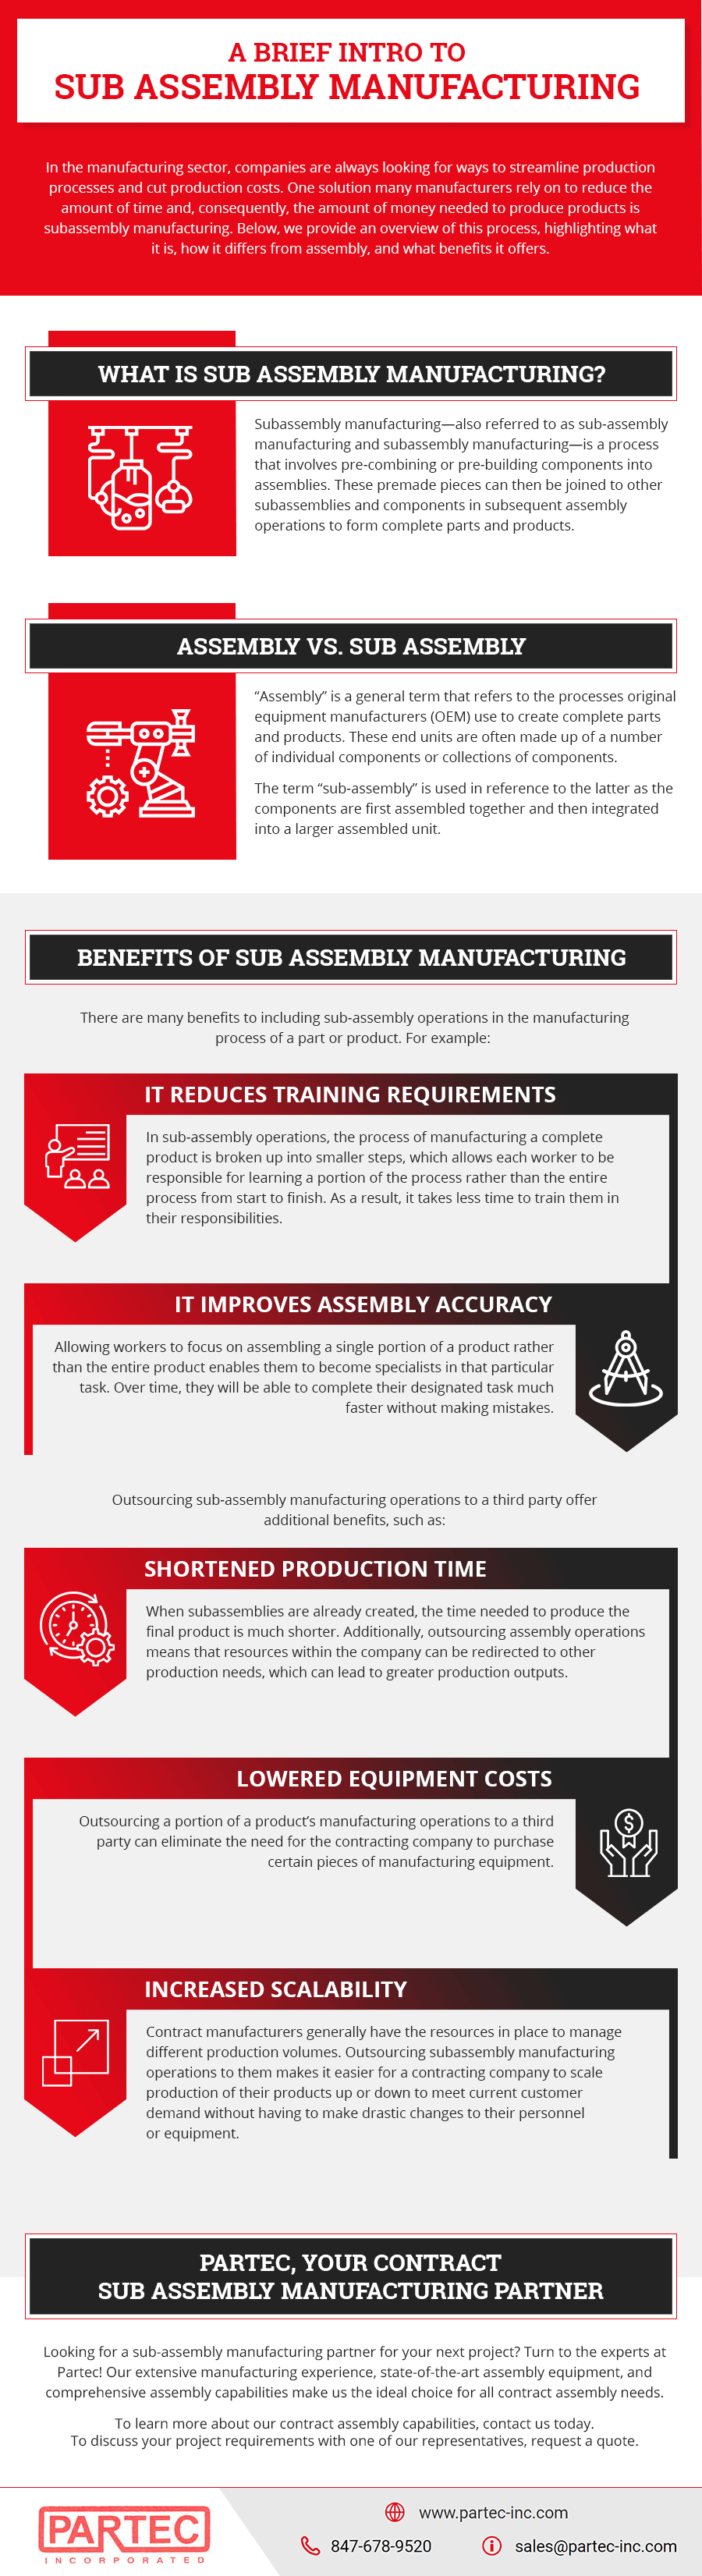 A Brief Intro to Sub Assembly Manufacturing